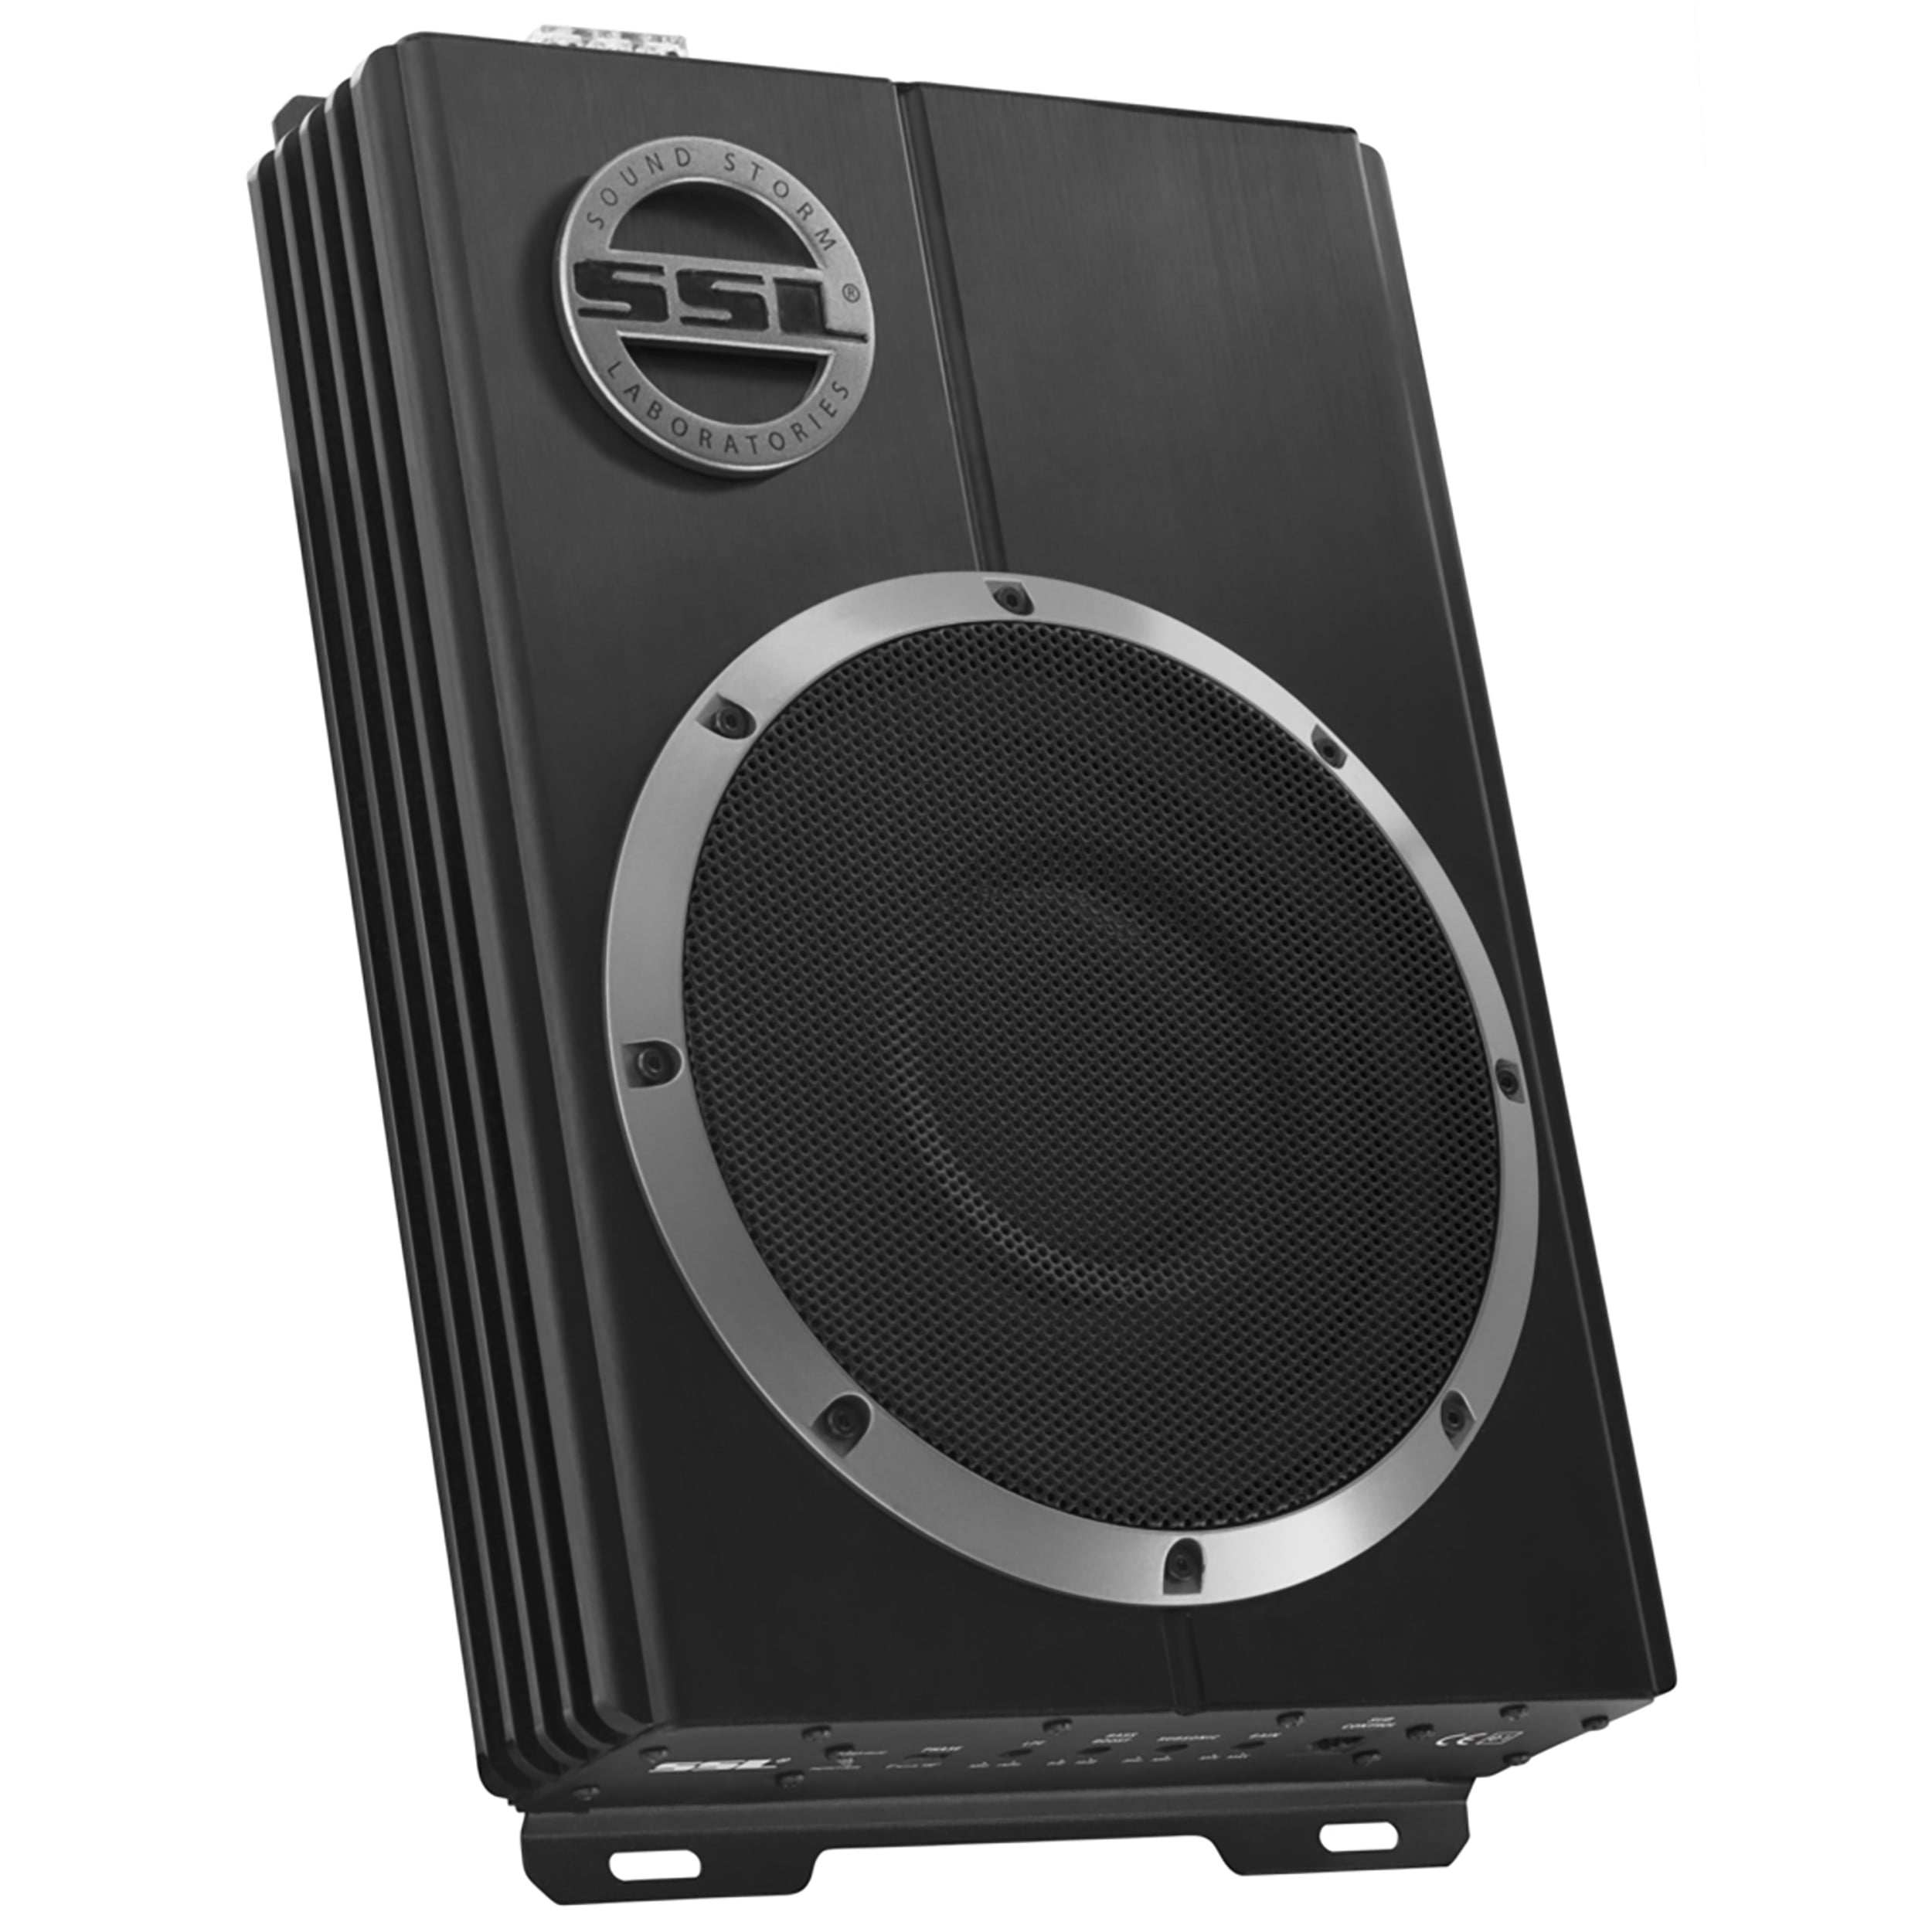 Sound Storm Laboratories LOPRO8 8 Inch Under Seat Audio Subwoofer Amplifier - 600 Watts Max, Low Profile, Remote Subwoofer Control, For Truck, Boxes and Enclosures - Walmart.com